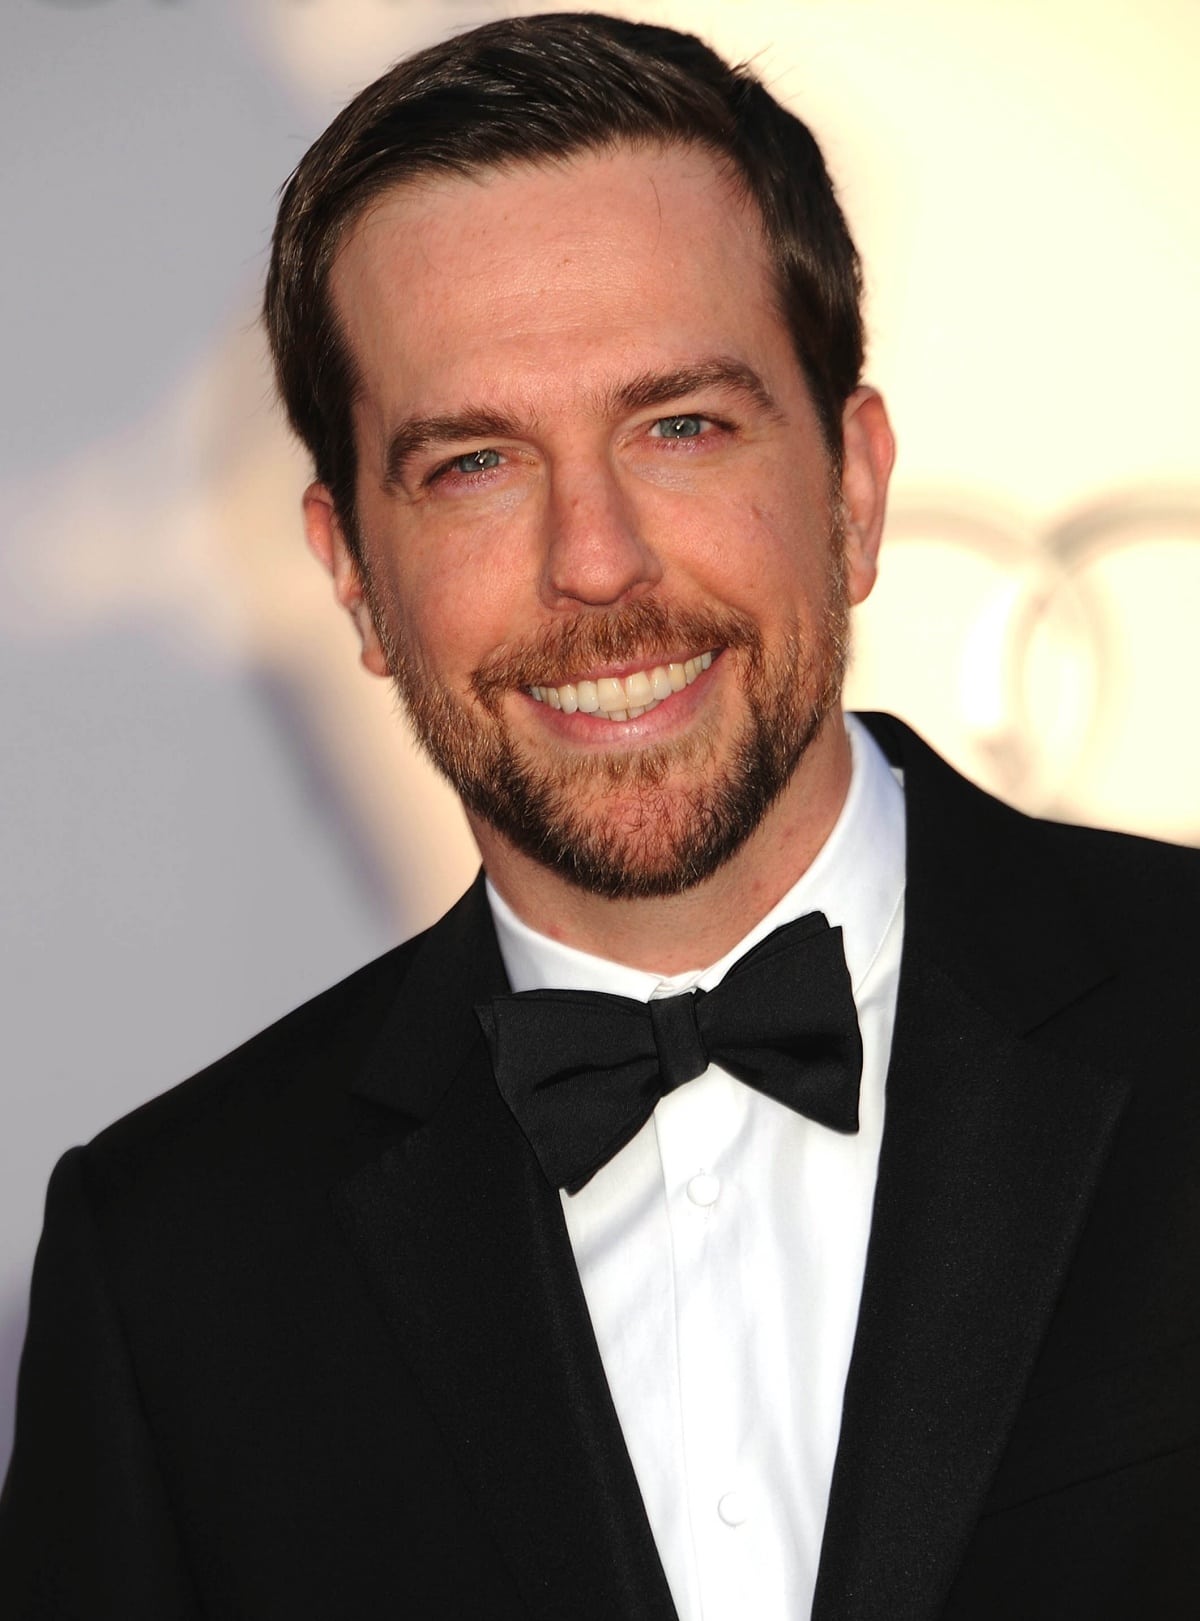 Ed Helms attending the BAFTA Brits to Watch event